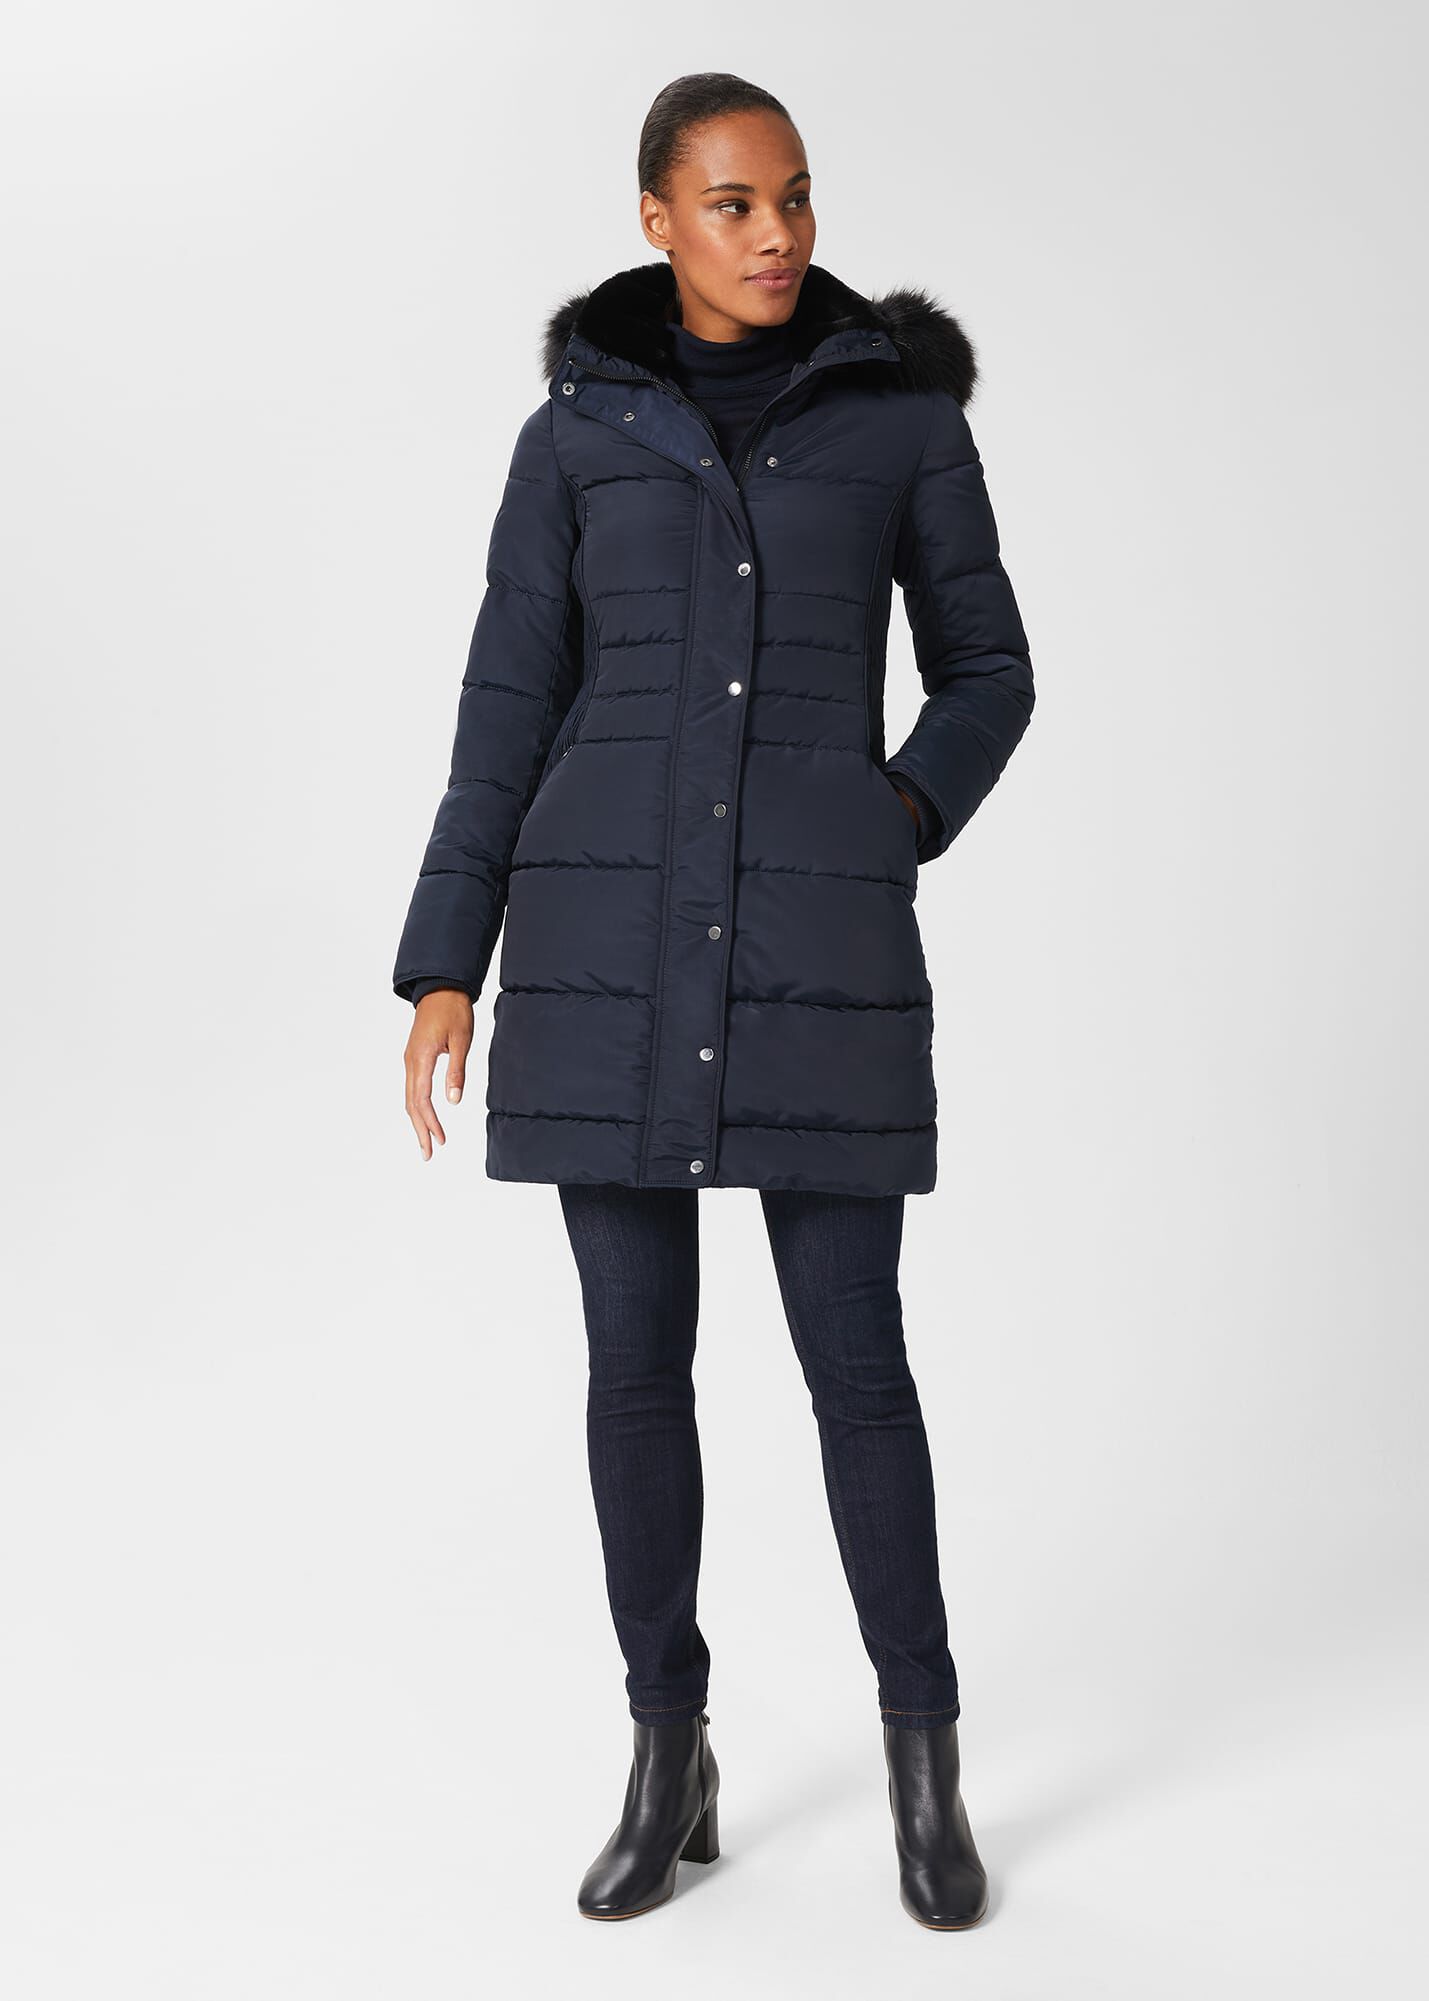 Women's Puffer Jackets| Padded, Quilted 